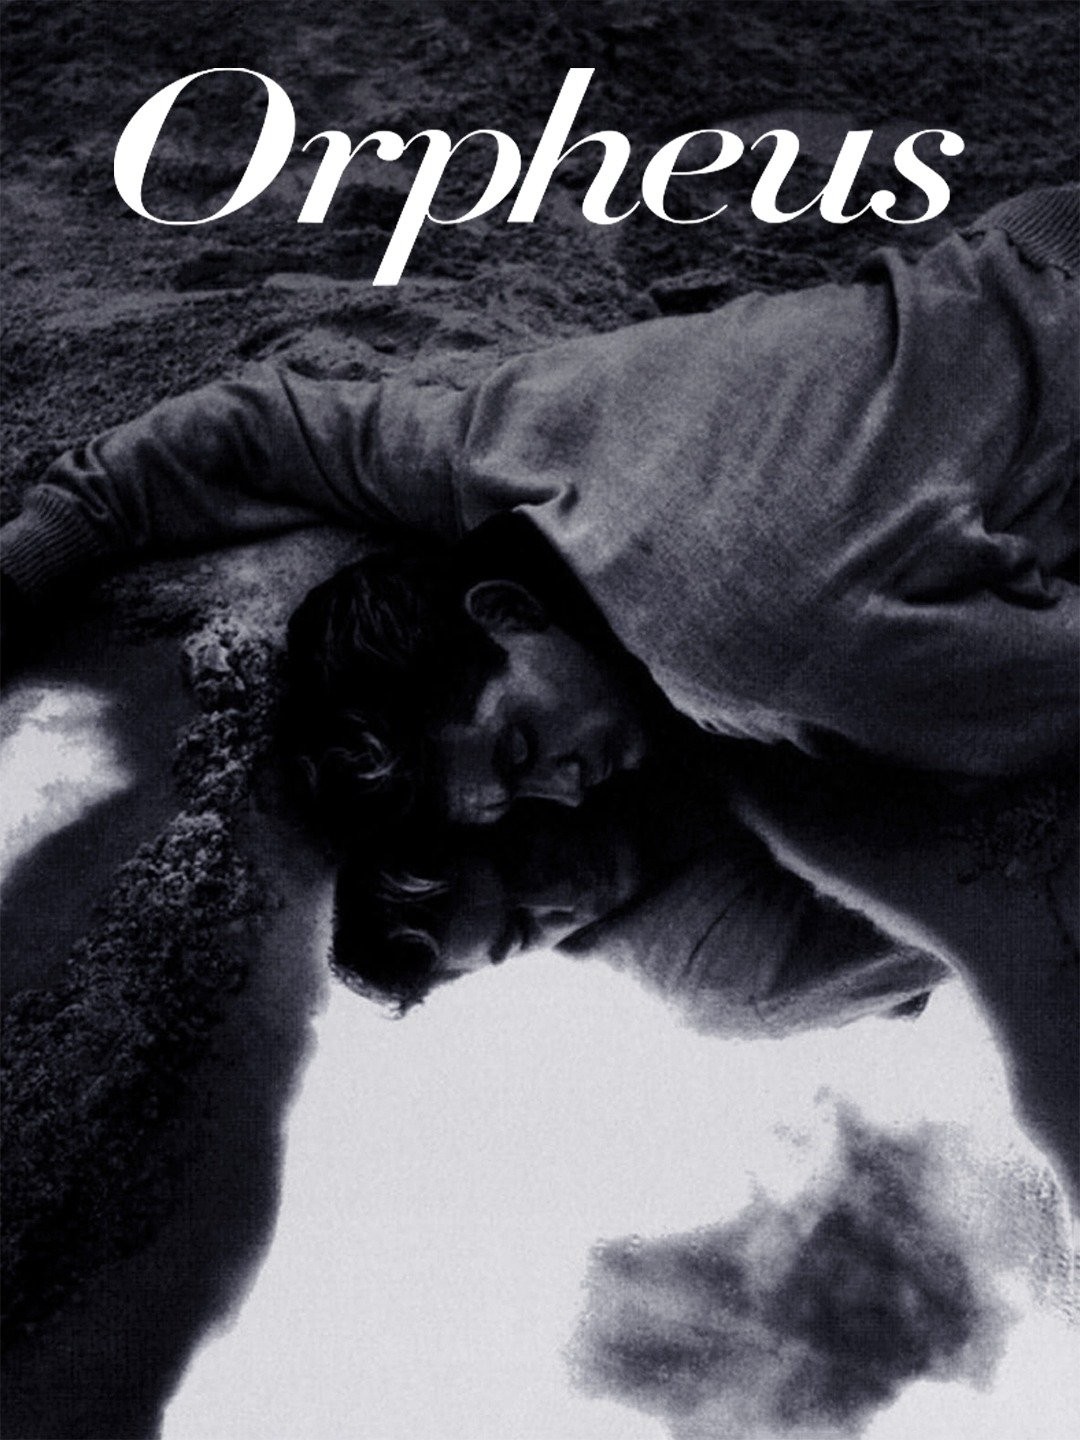 Orphee (Orpheus) DVD 1950 Orfeusz / Directed by Jean Cocteau